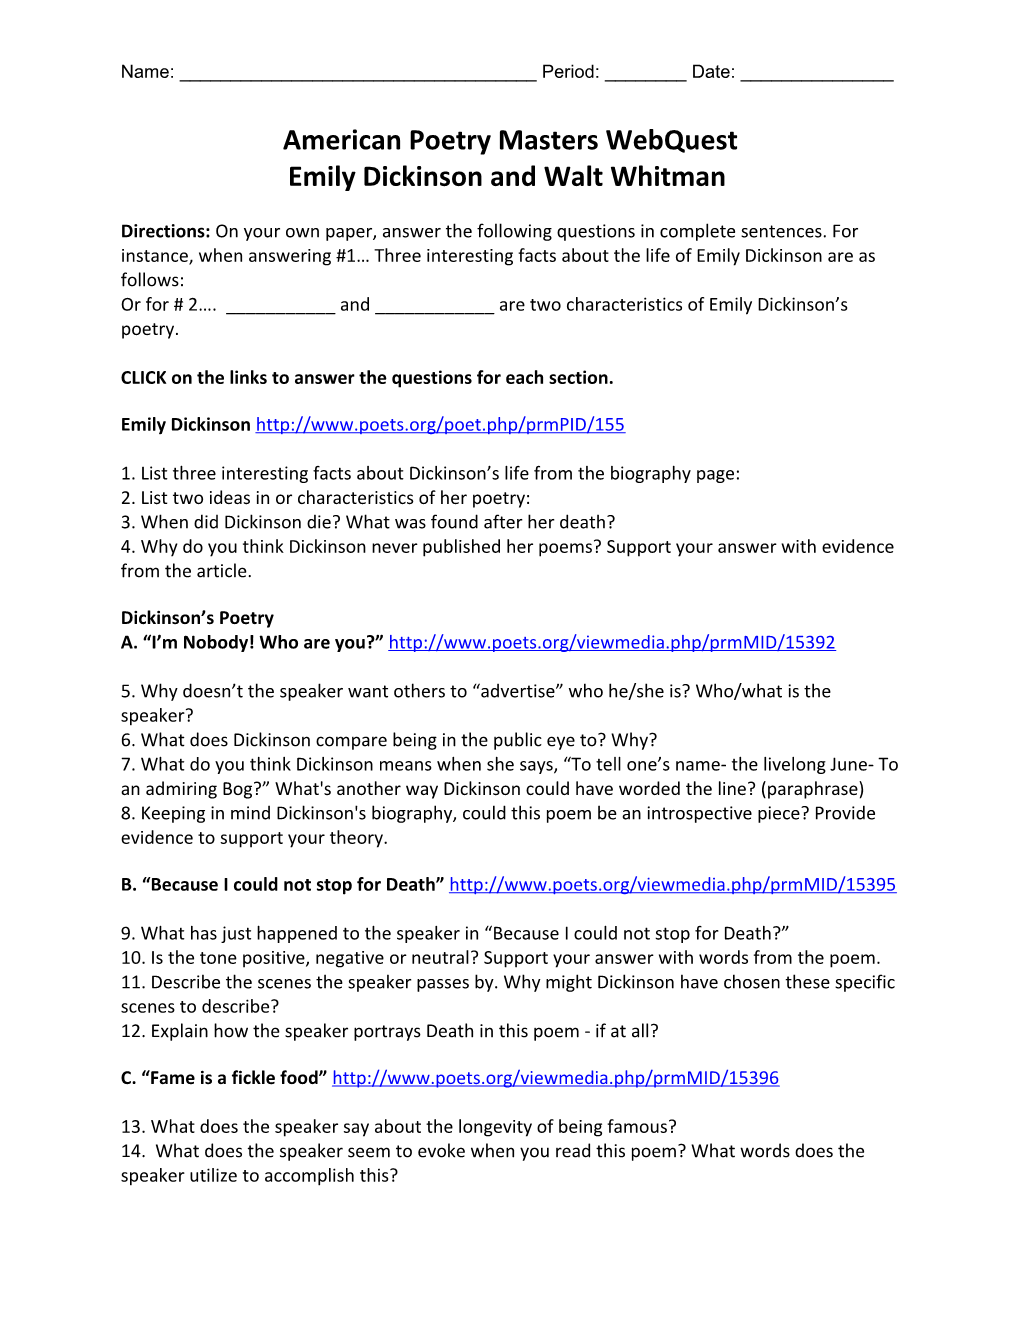 American Poetry Masters Webquest Emily Dickinson and Walt Whitman